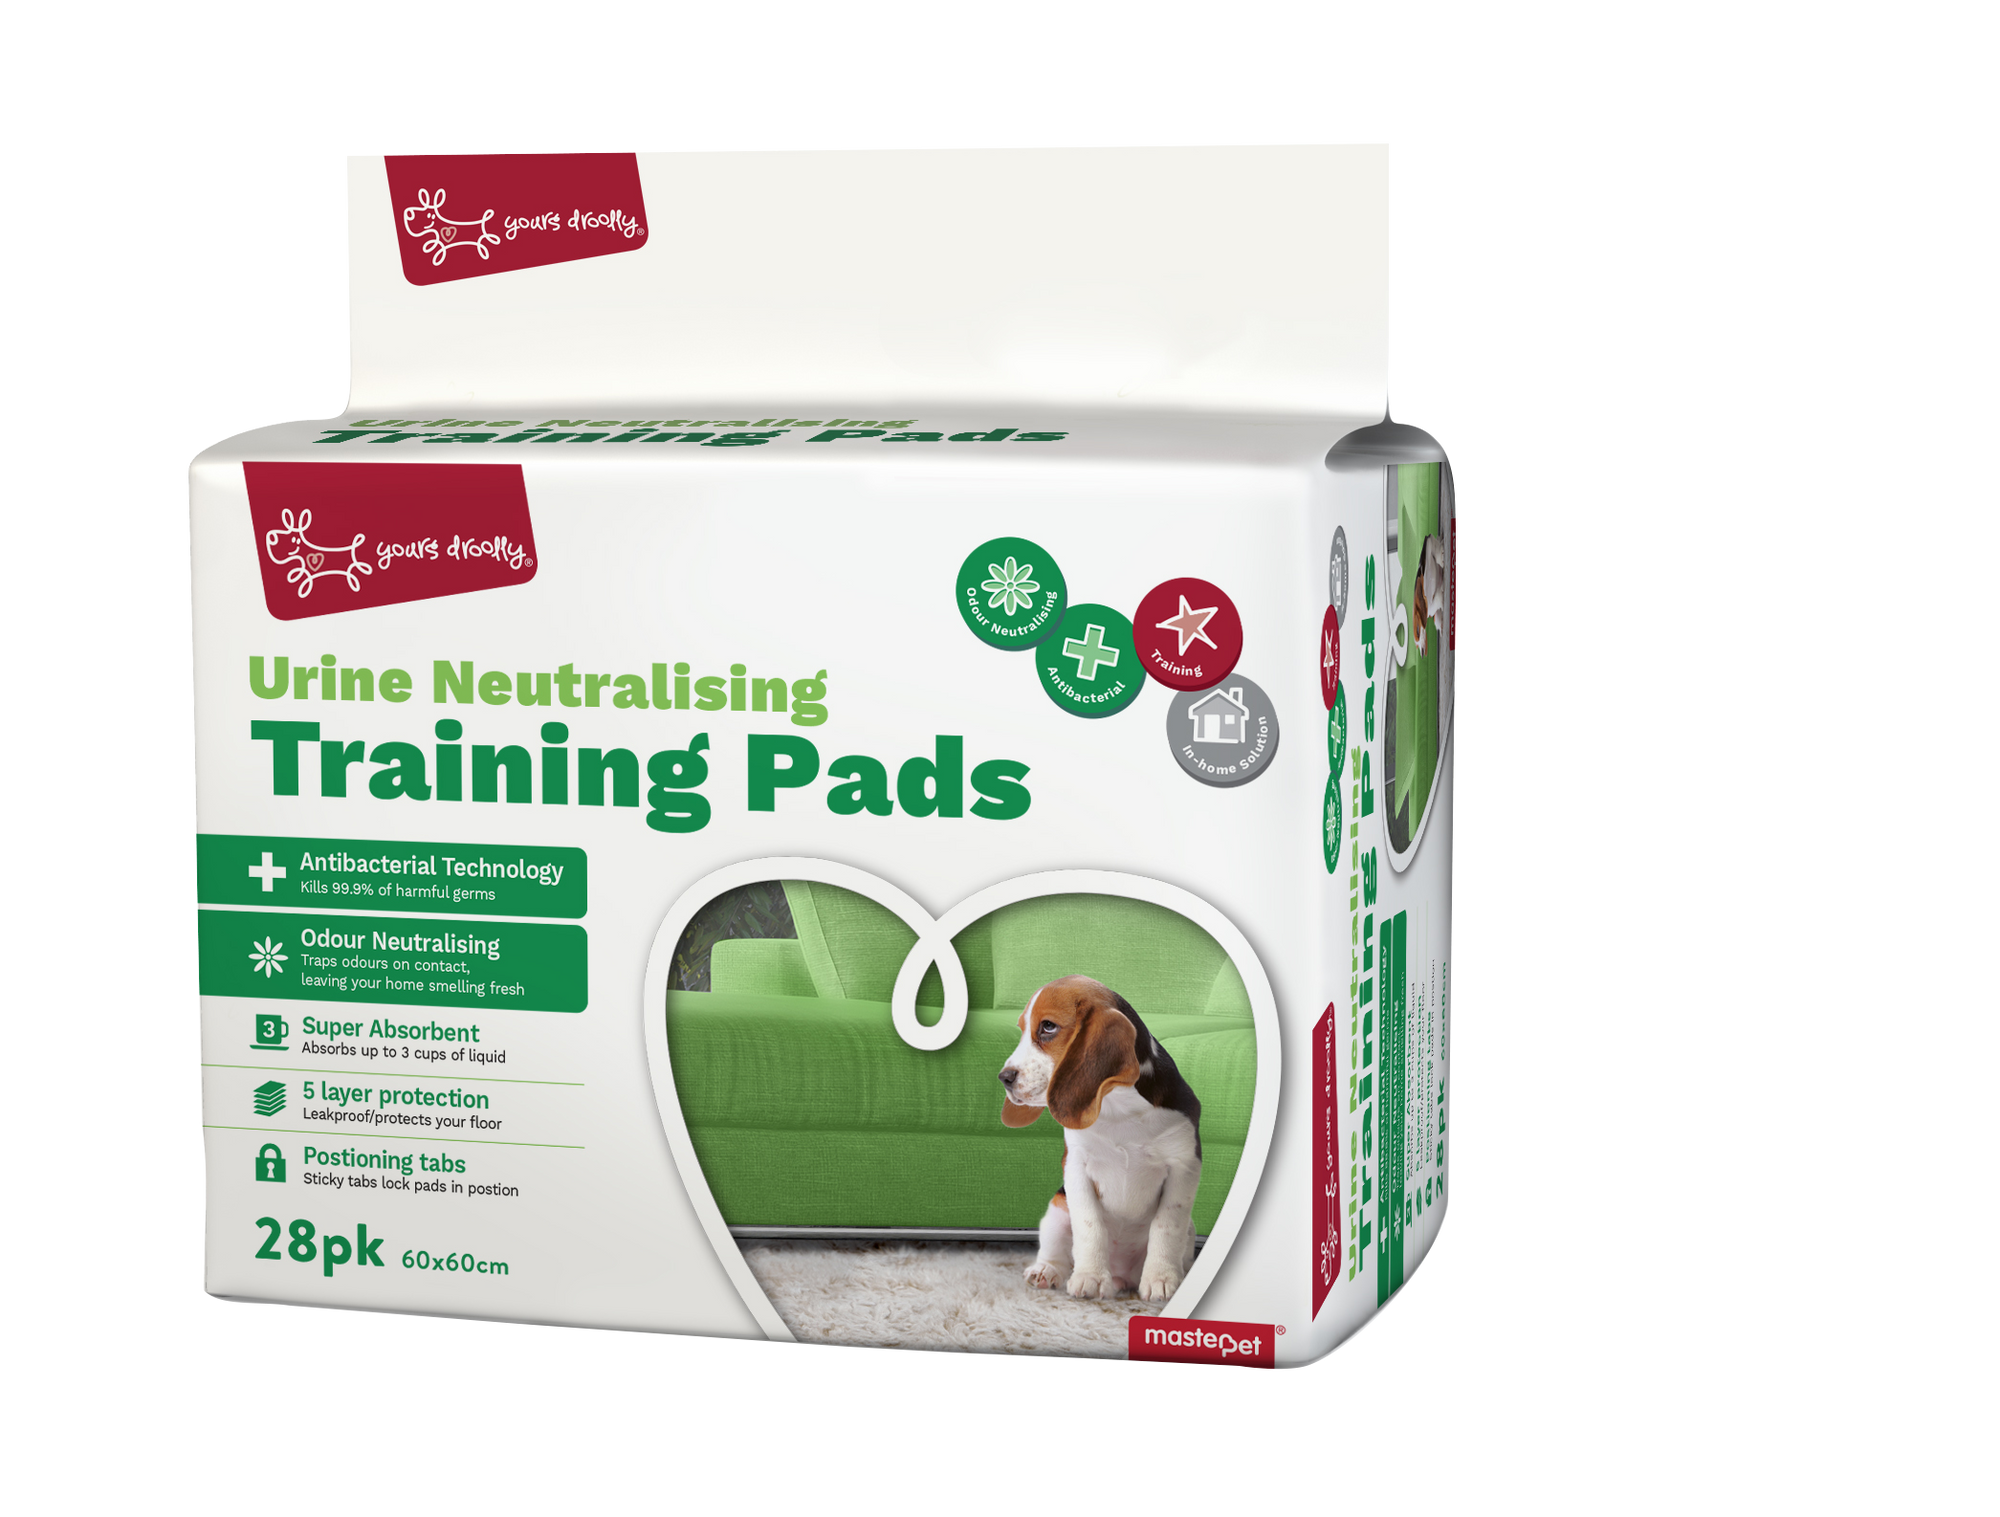 Yours Droolly Urine Neutralising Pads 28pk - RSPCA VIC